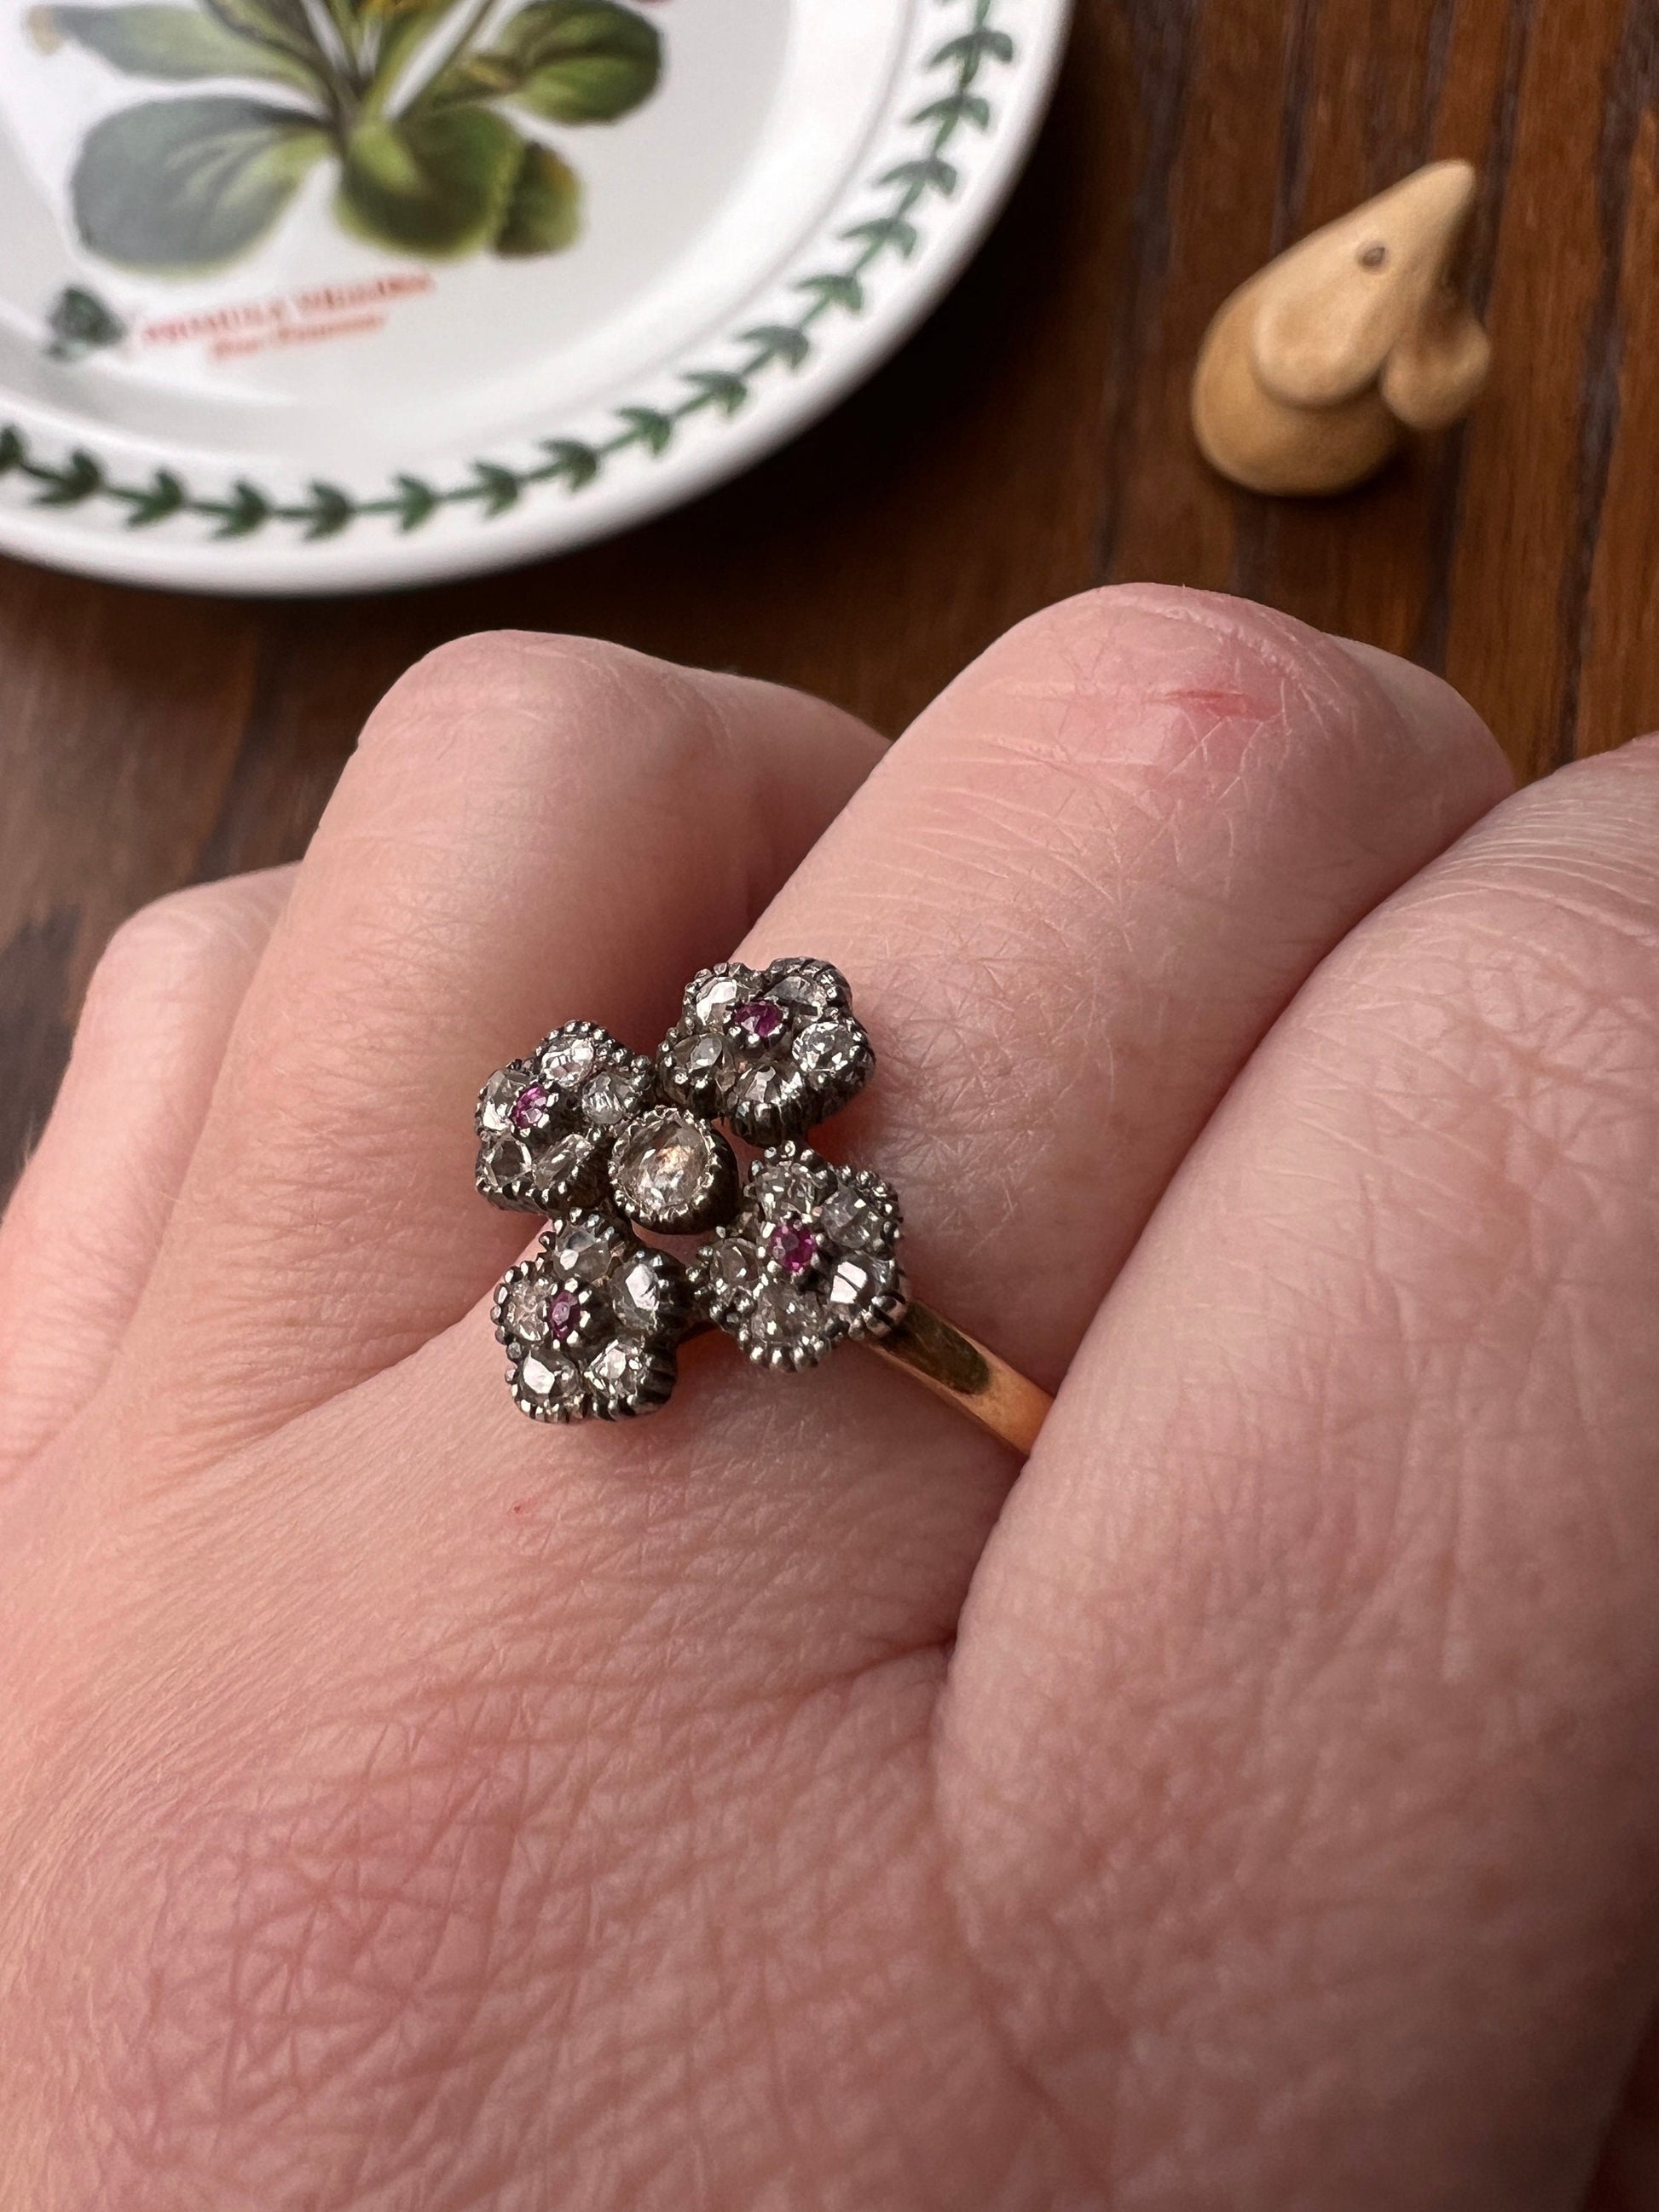 Cruciform FLORAL Rose Old Mine Cut DIAMOND Encrusted Ring Ruby Center French Georgian Victorian Antique 18k Gold 3D Unique Forget Me Not OmC